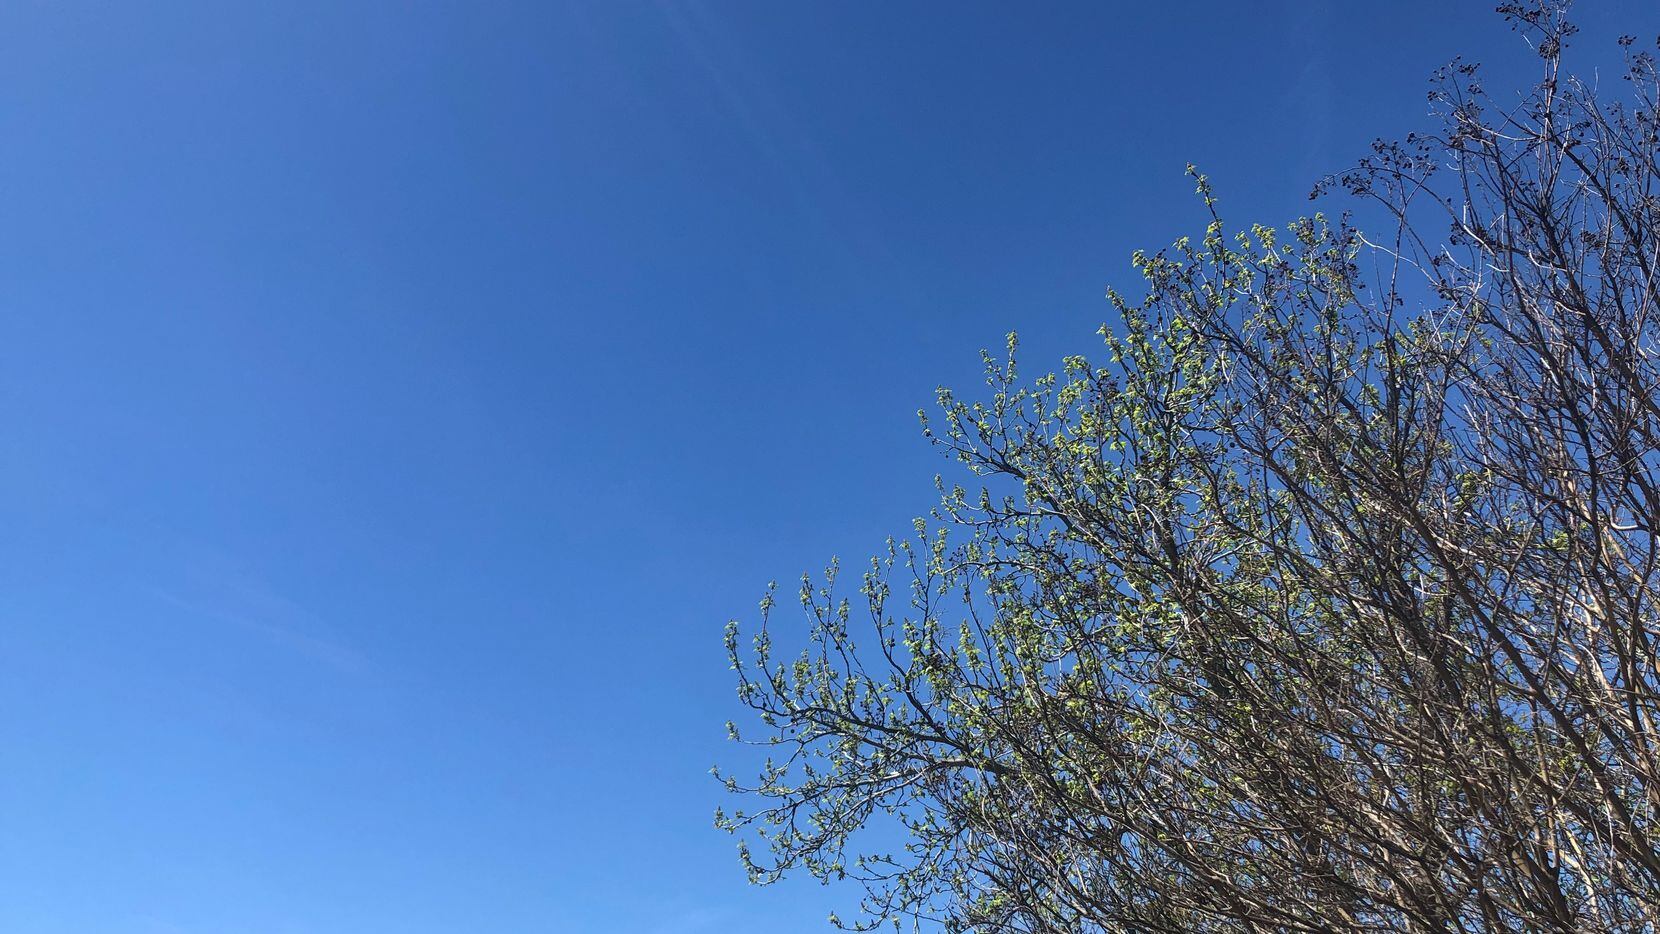 A blue sky over northwest Dallas on March 25, 2020.